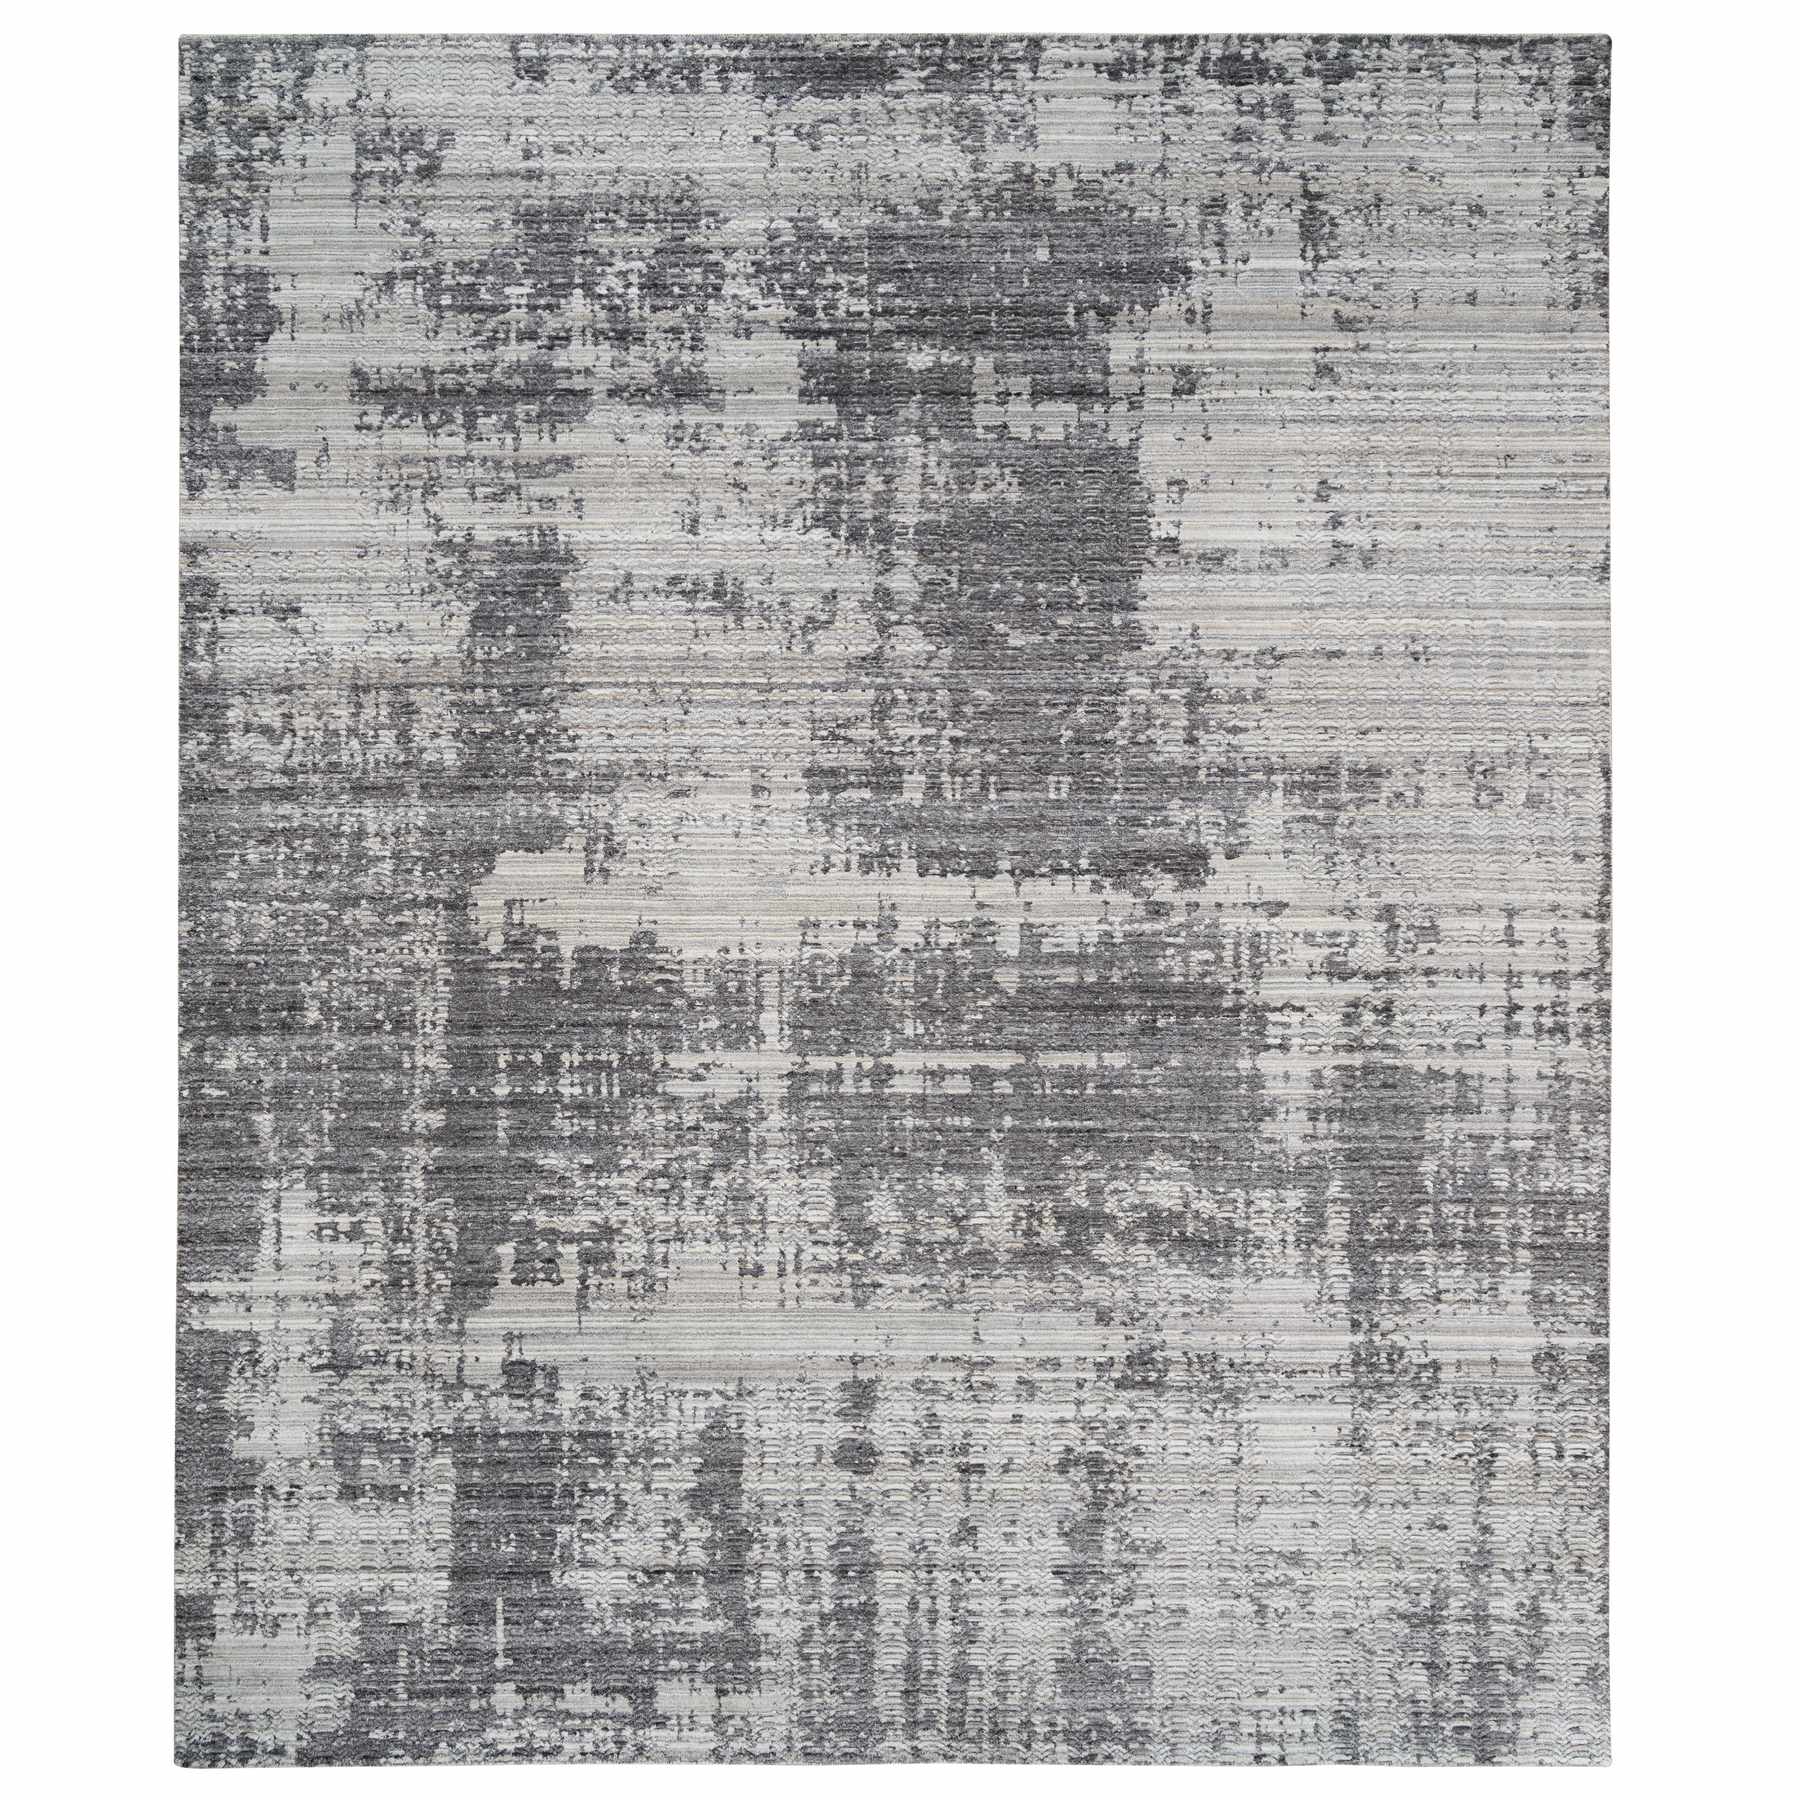 12'2"x15' Gray, Variegated Texture Modern Abstract Design, Hand Loomed Natural Wool, Oversized Oriental Rug 